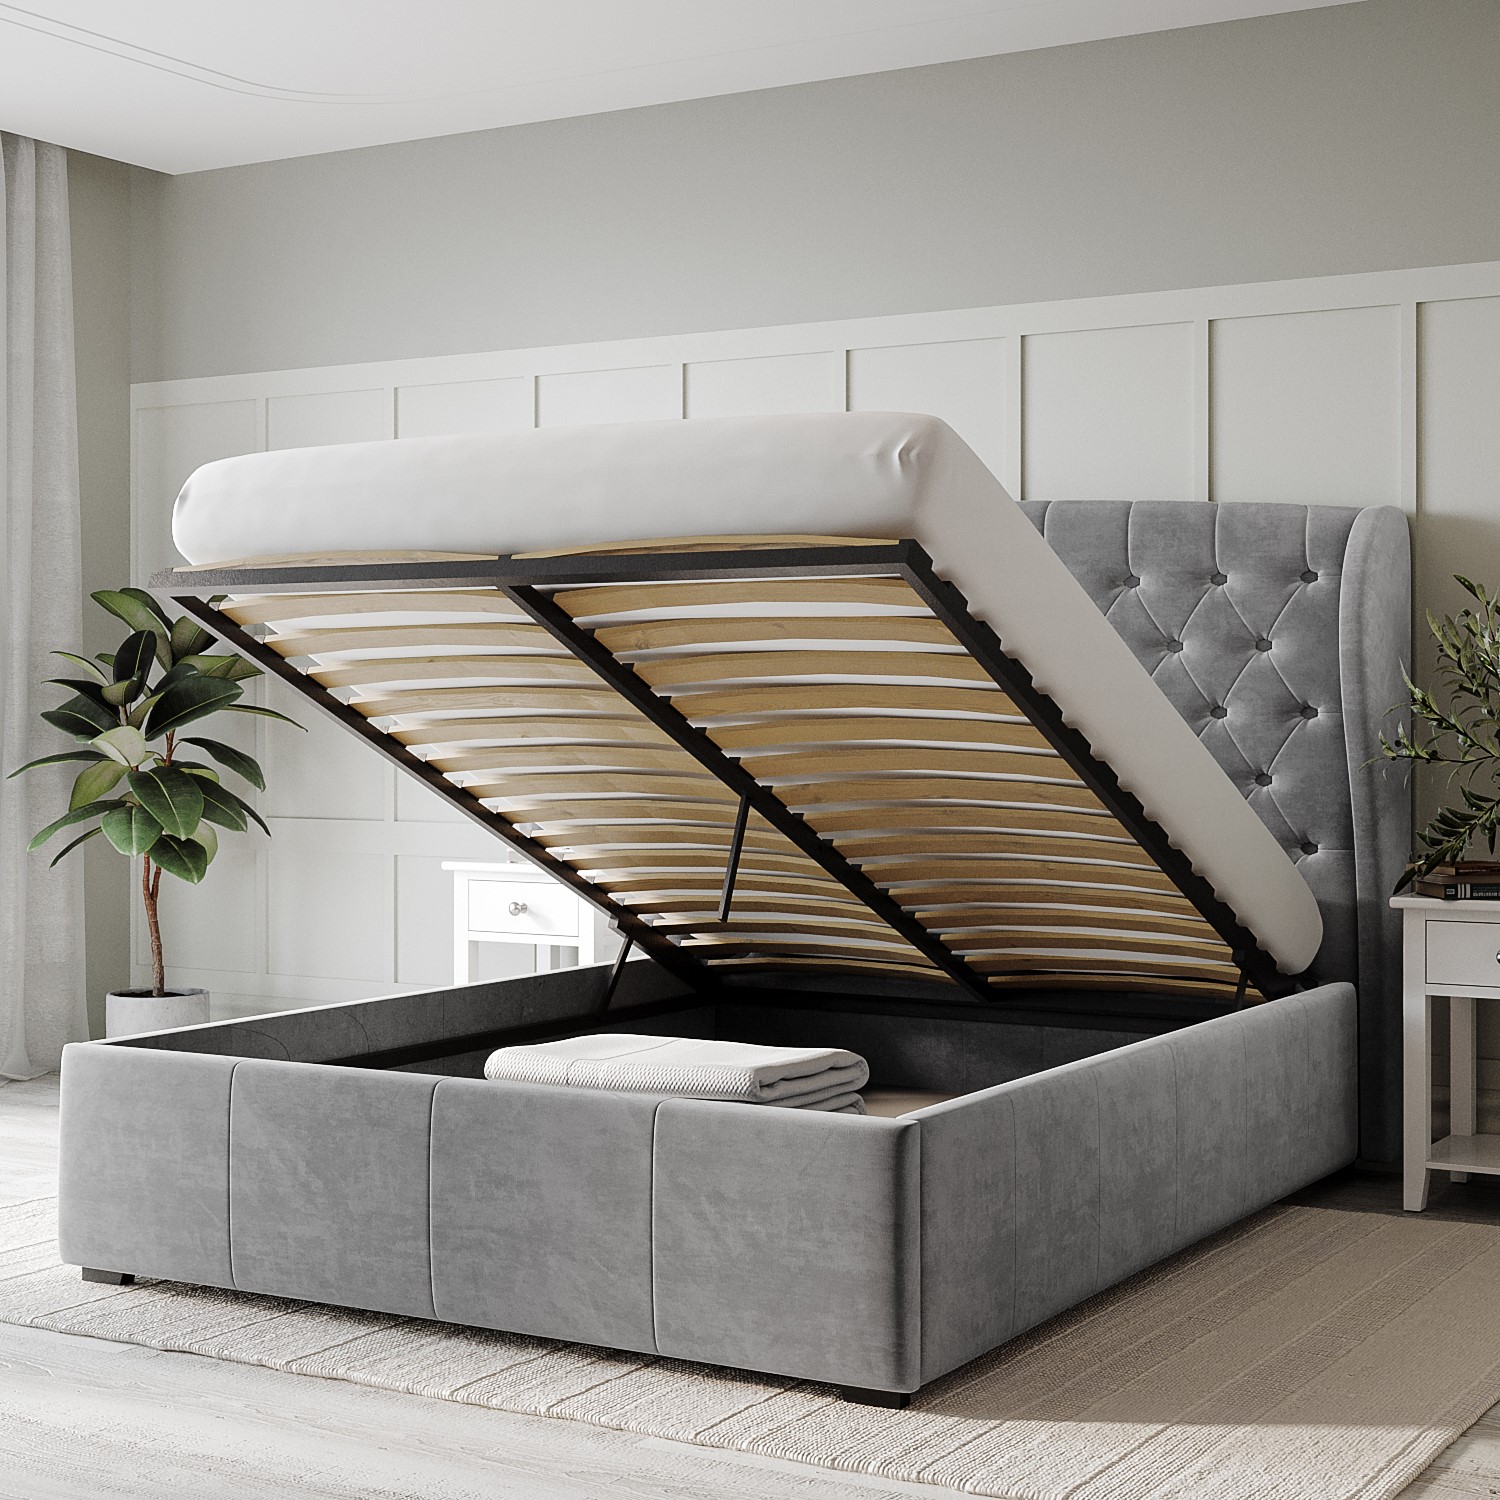 Read more about Grey velvet small double ottoman bed with winged headboard safina